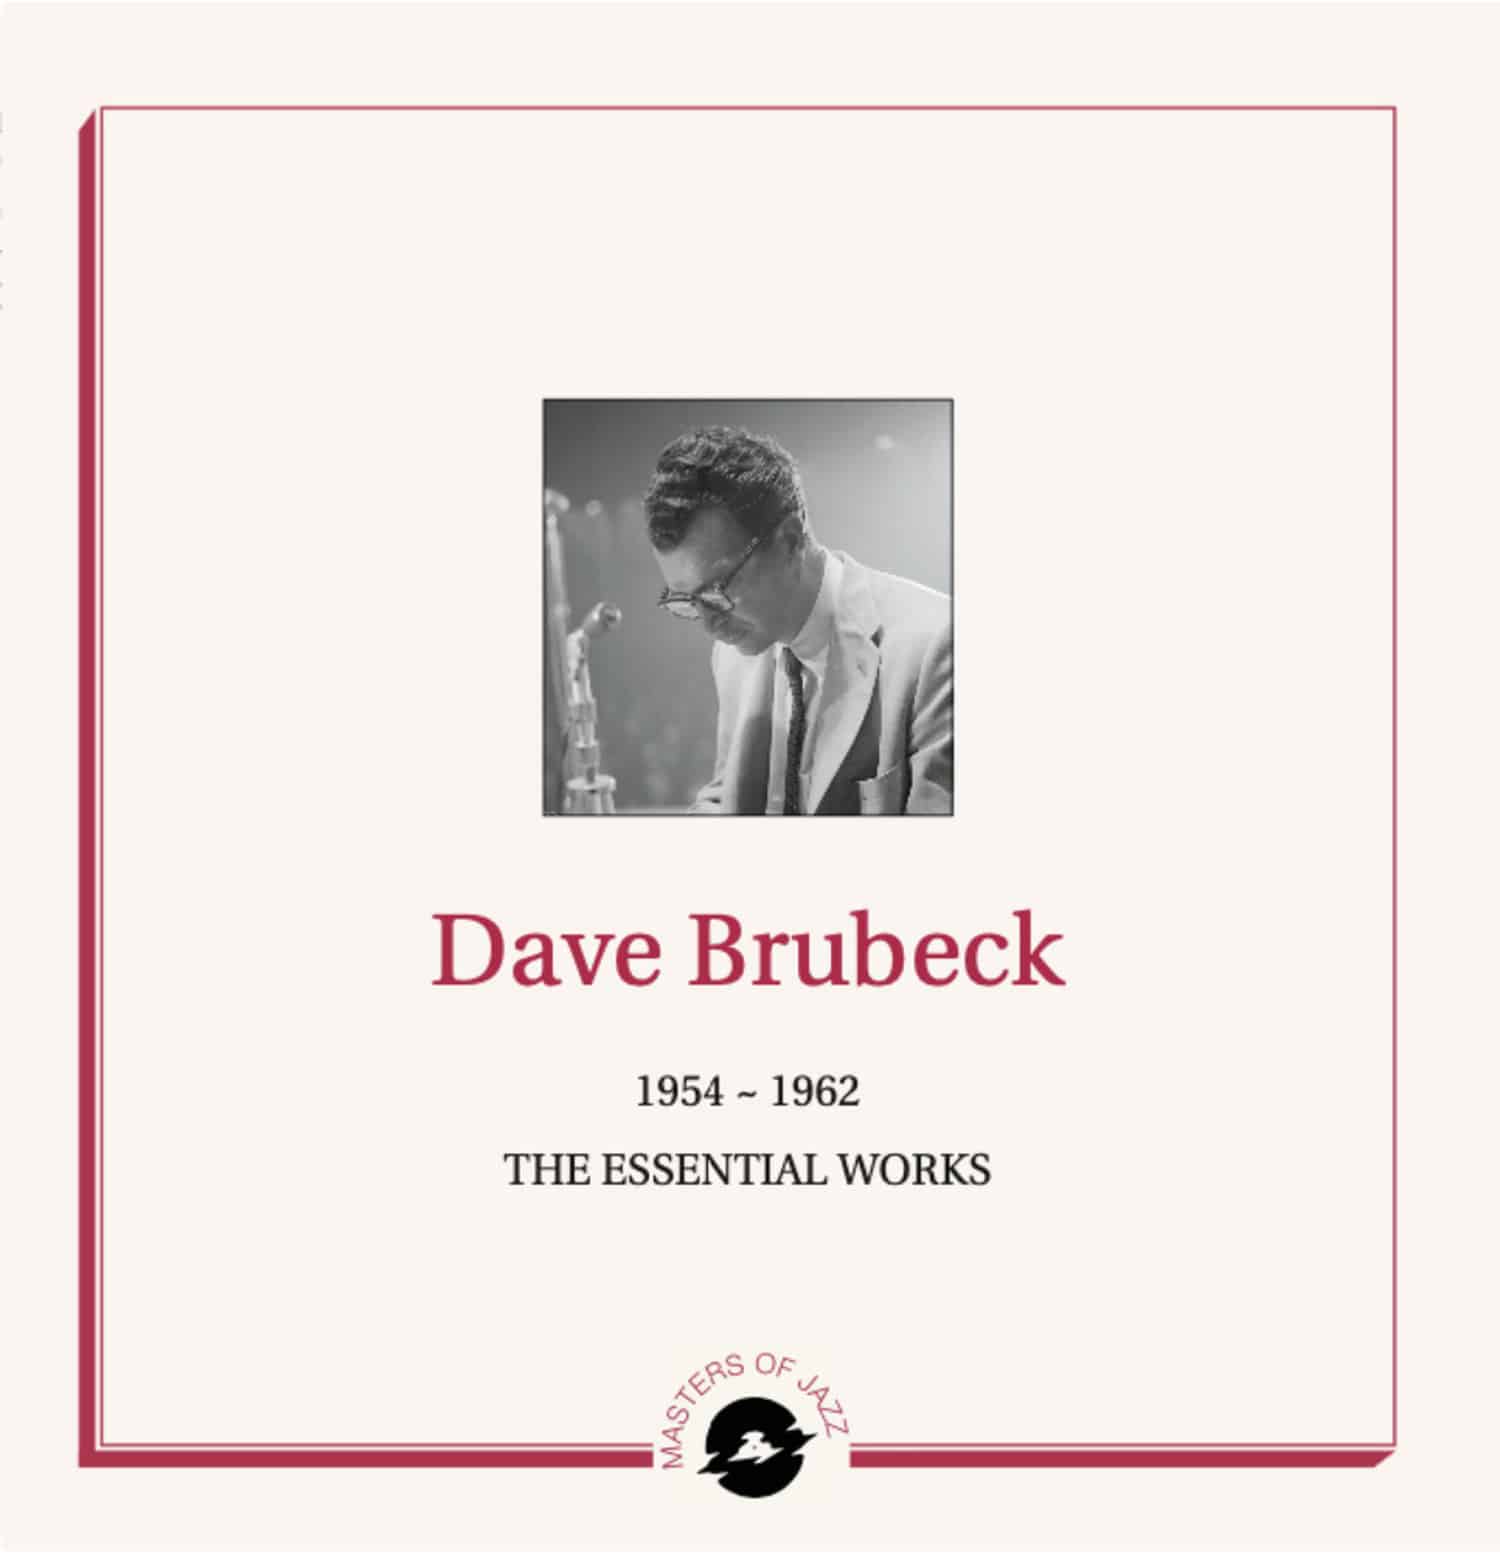 Dave Brubeck - THE ESSENTIAL WORKS 1954-1962 